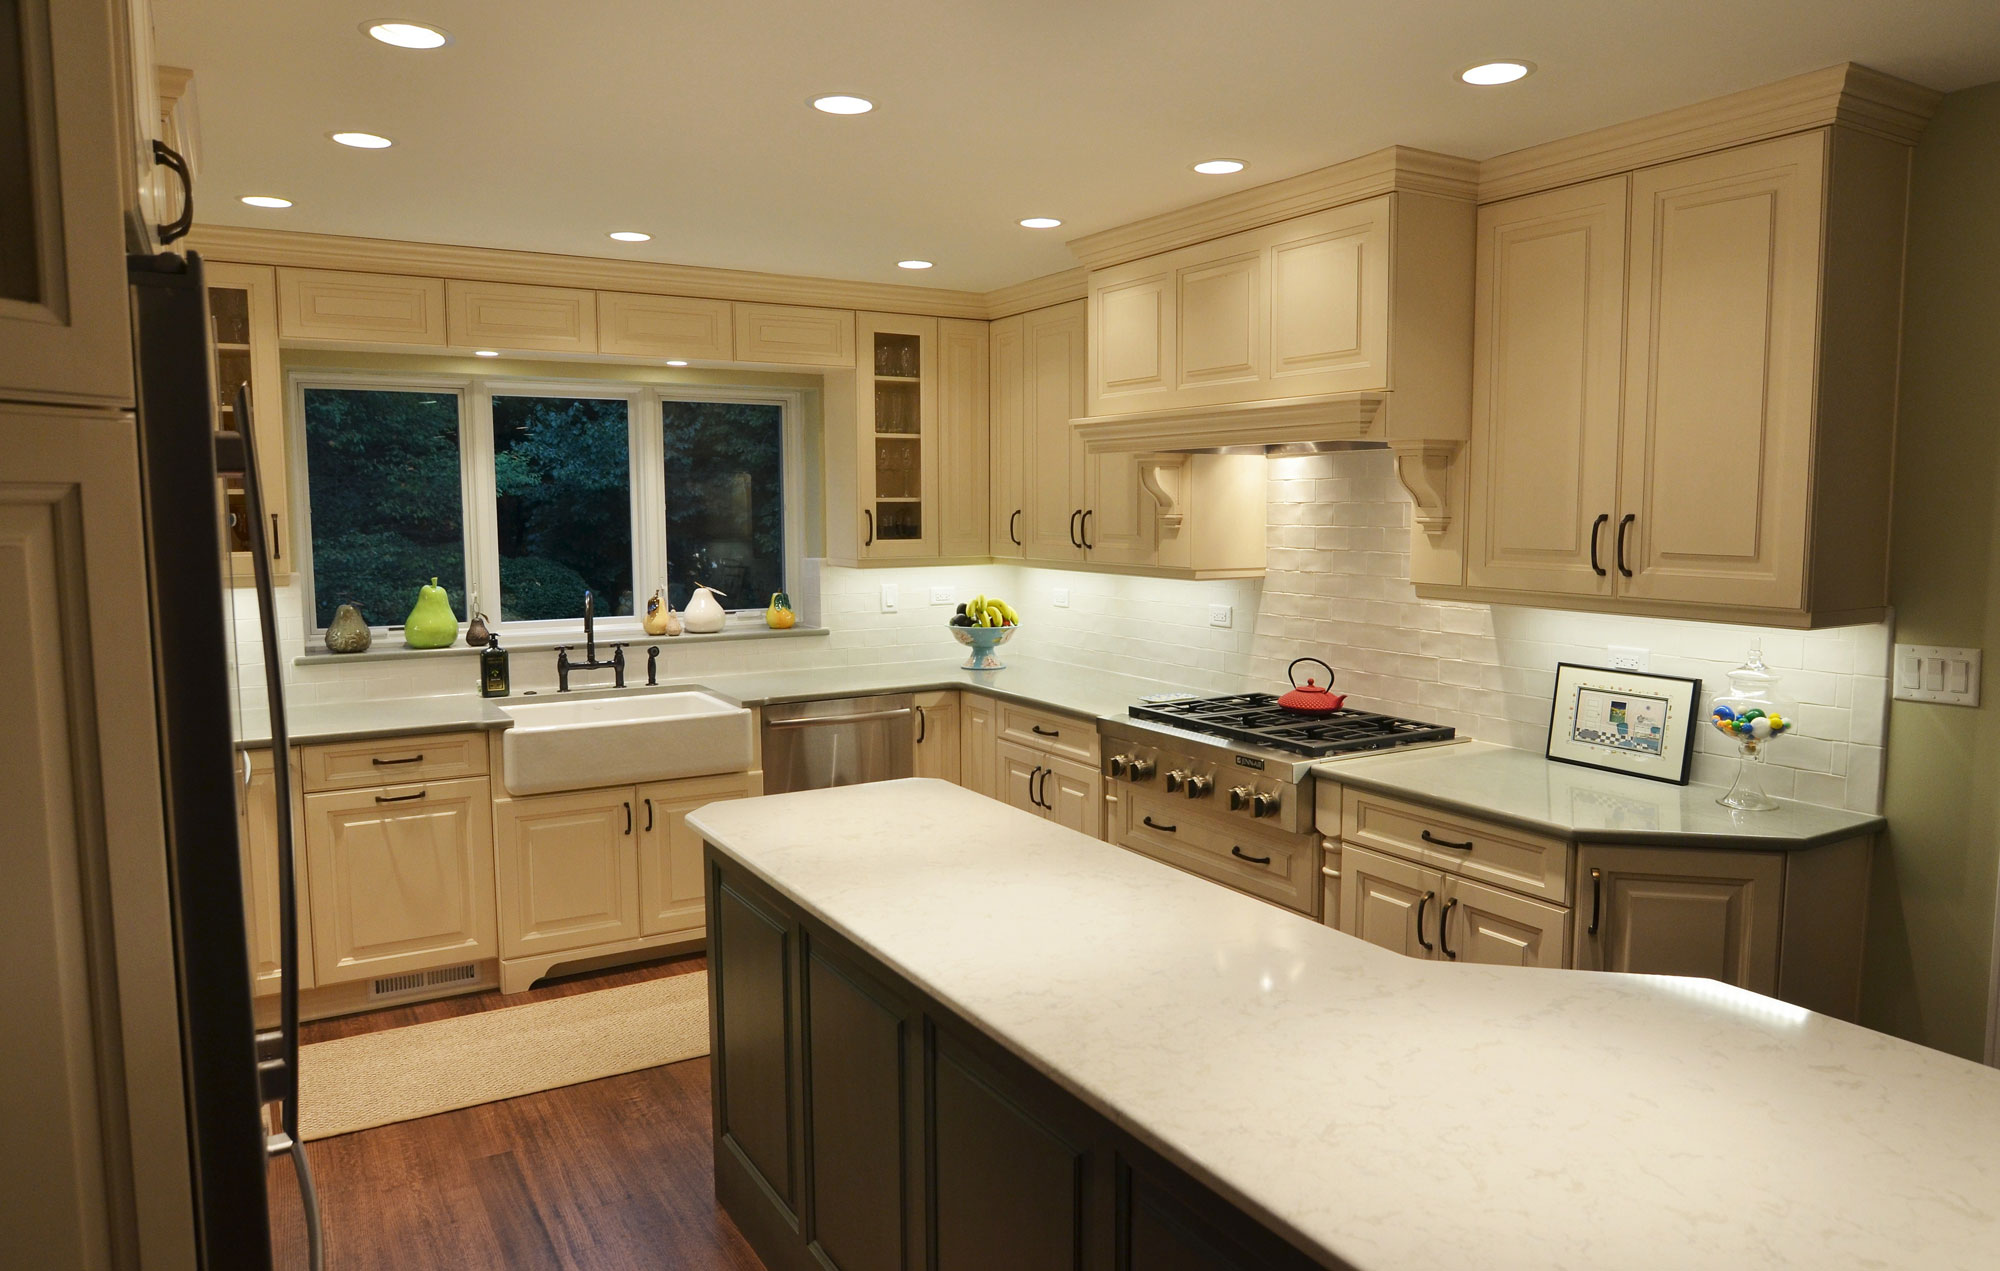 Kitchen remodeling in Naperville, IL. Custom kitchen counters and green island.